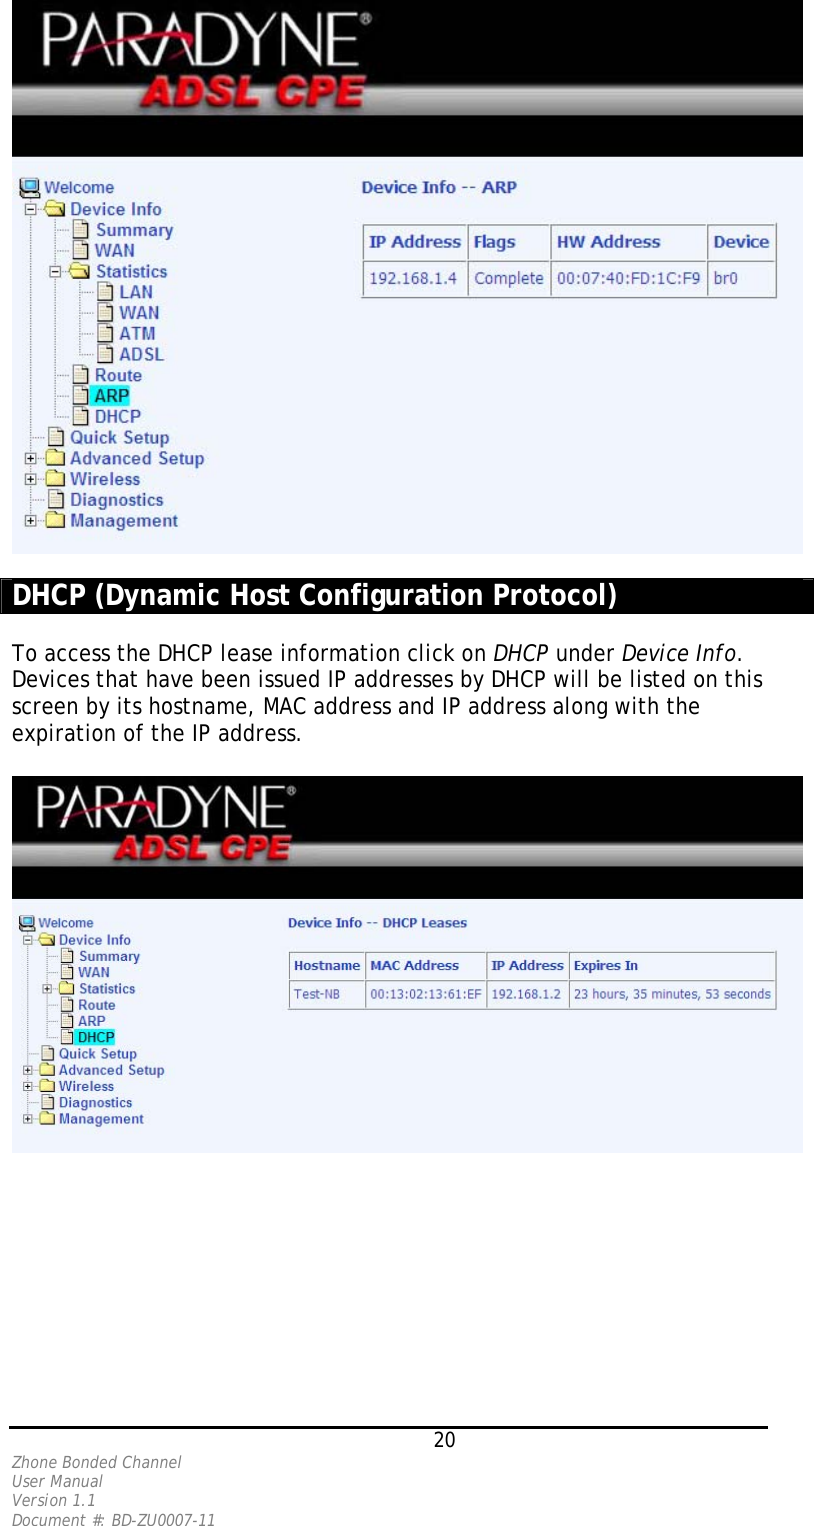   DHCP (Dynamic Host Configuration Protocol)  To access the DHCP lease information click on DHCP under Device Info. Devices that have been issued IP addresses by DHCP will be listed on this screen by its hostname, MAC address and IP address along with the expiration of the IP address.     20 Zhone Bonded Channel User Manual  Version 1.1 Document #: BD-ZU0007-11 